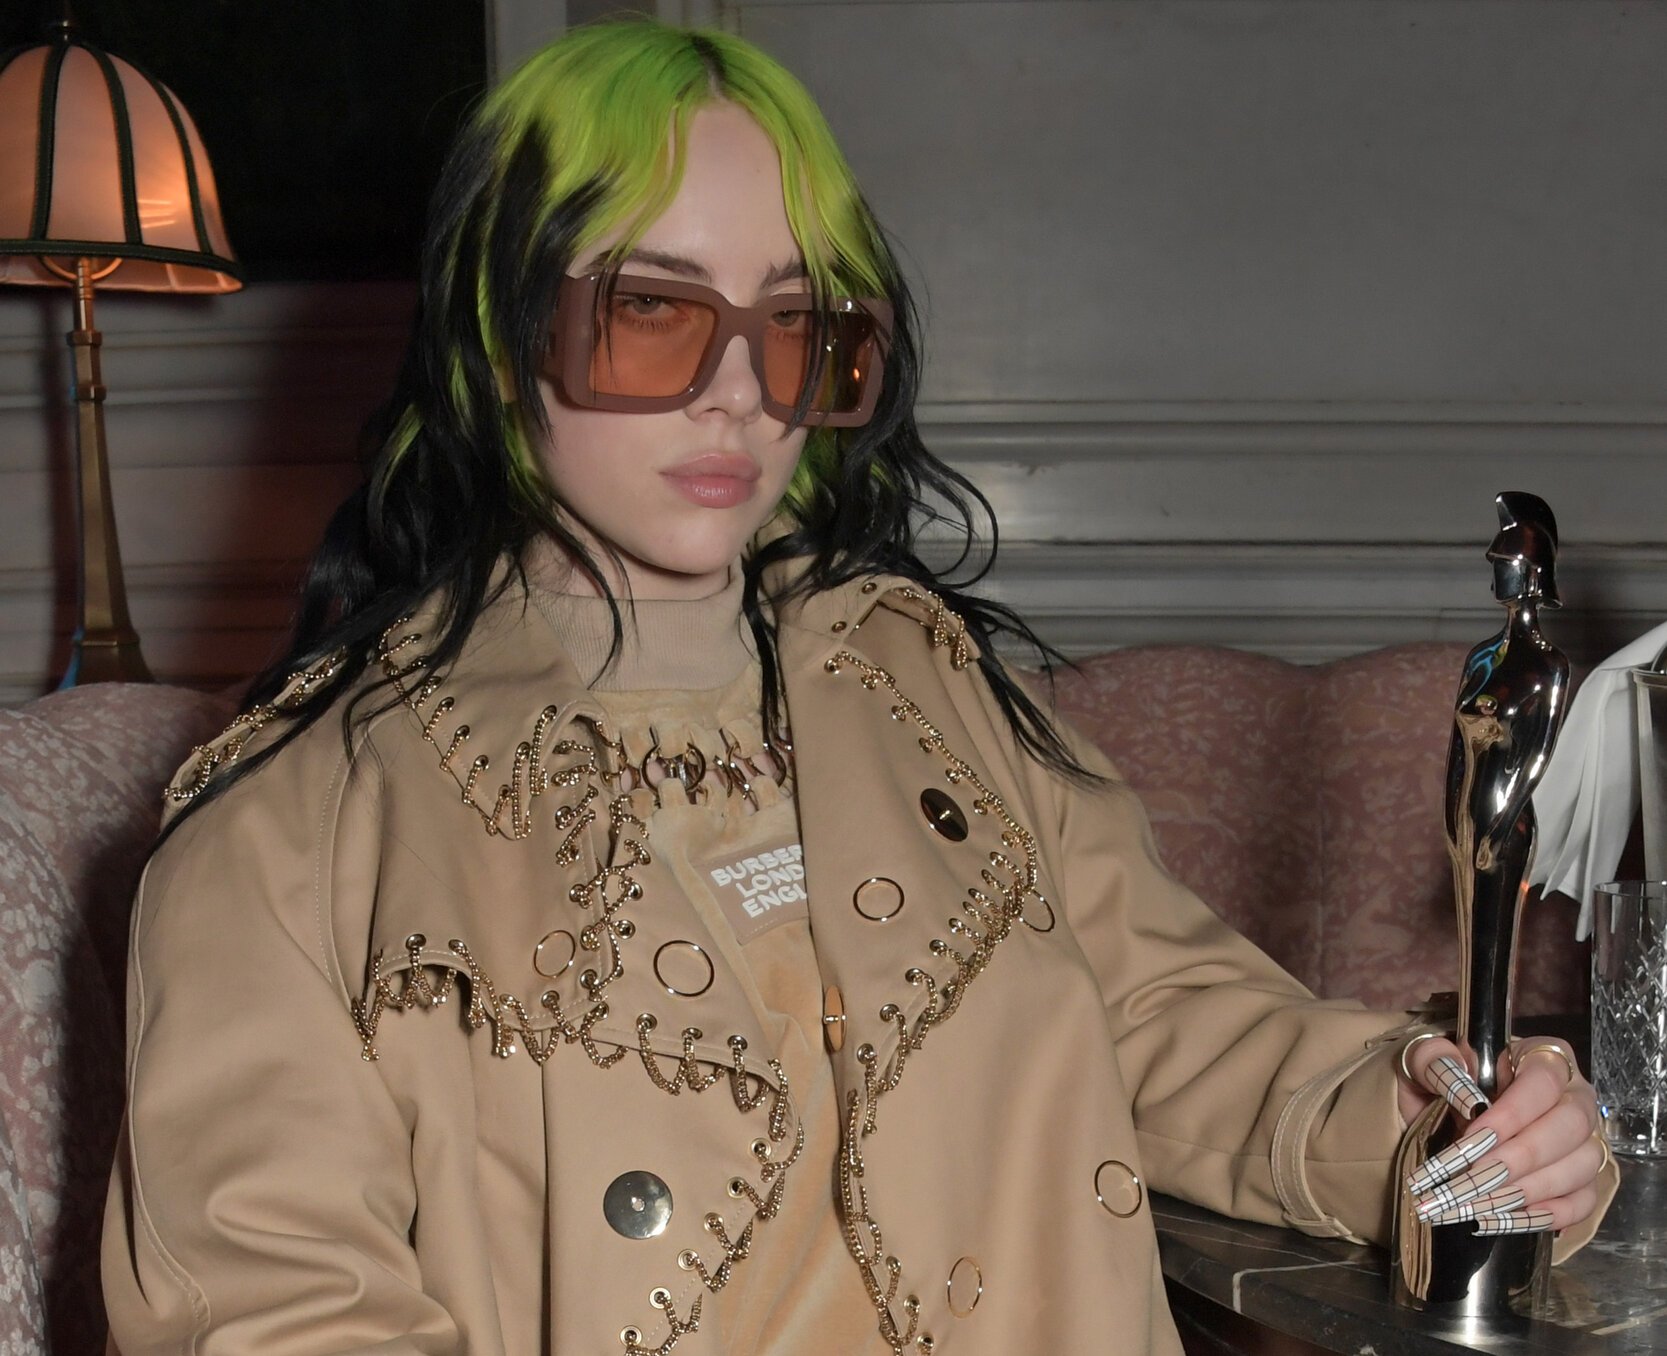 Billie Eilish attends the Universal Music BRIT Awards after-party 2020 hosted by Soho House & PATRON at The Ned on February 18, 2020 in London, England.